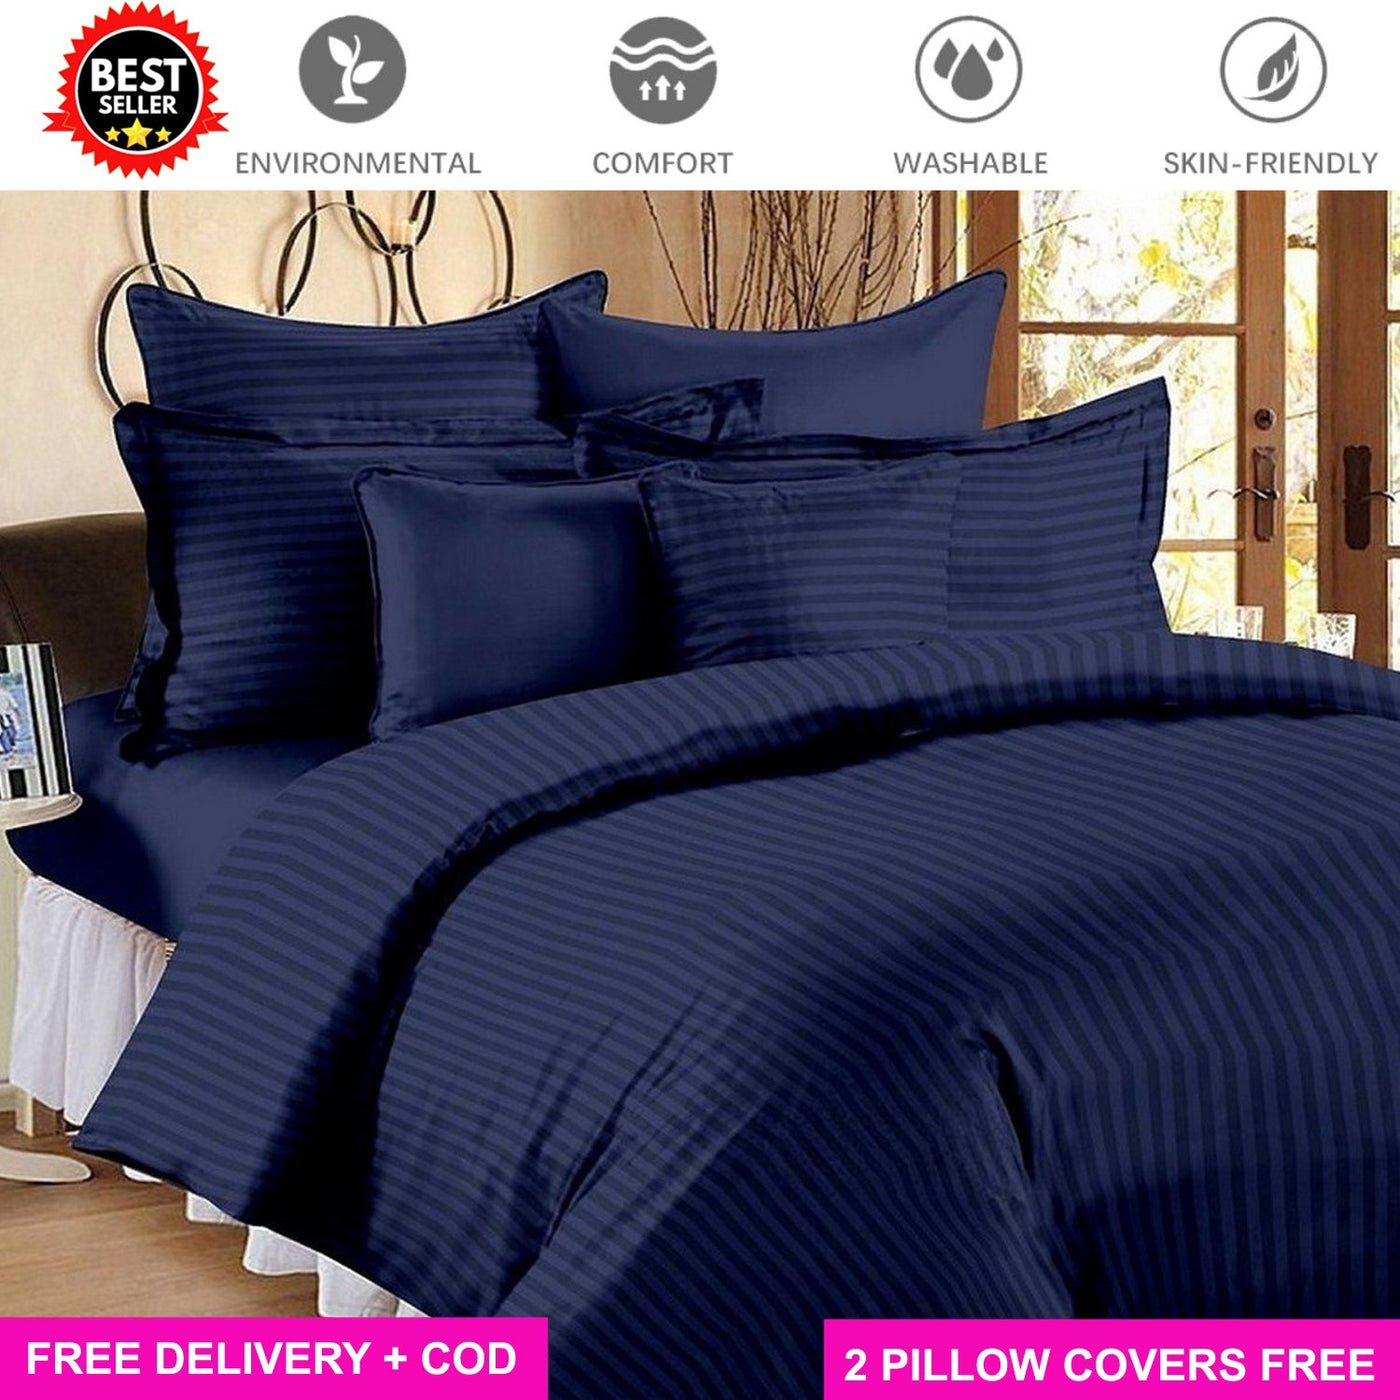 Cotton Elastic Fitted Bedsheet with 2 Pillow Covers - Fits with any Beds & Mattresses Great Happy IN Satin Navy Blue KING SIZE 